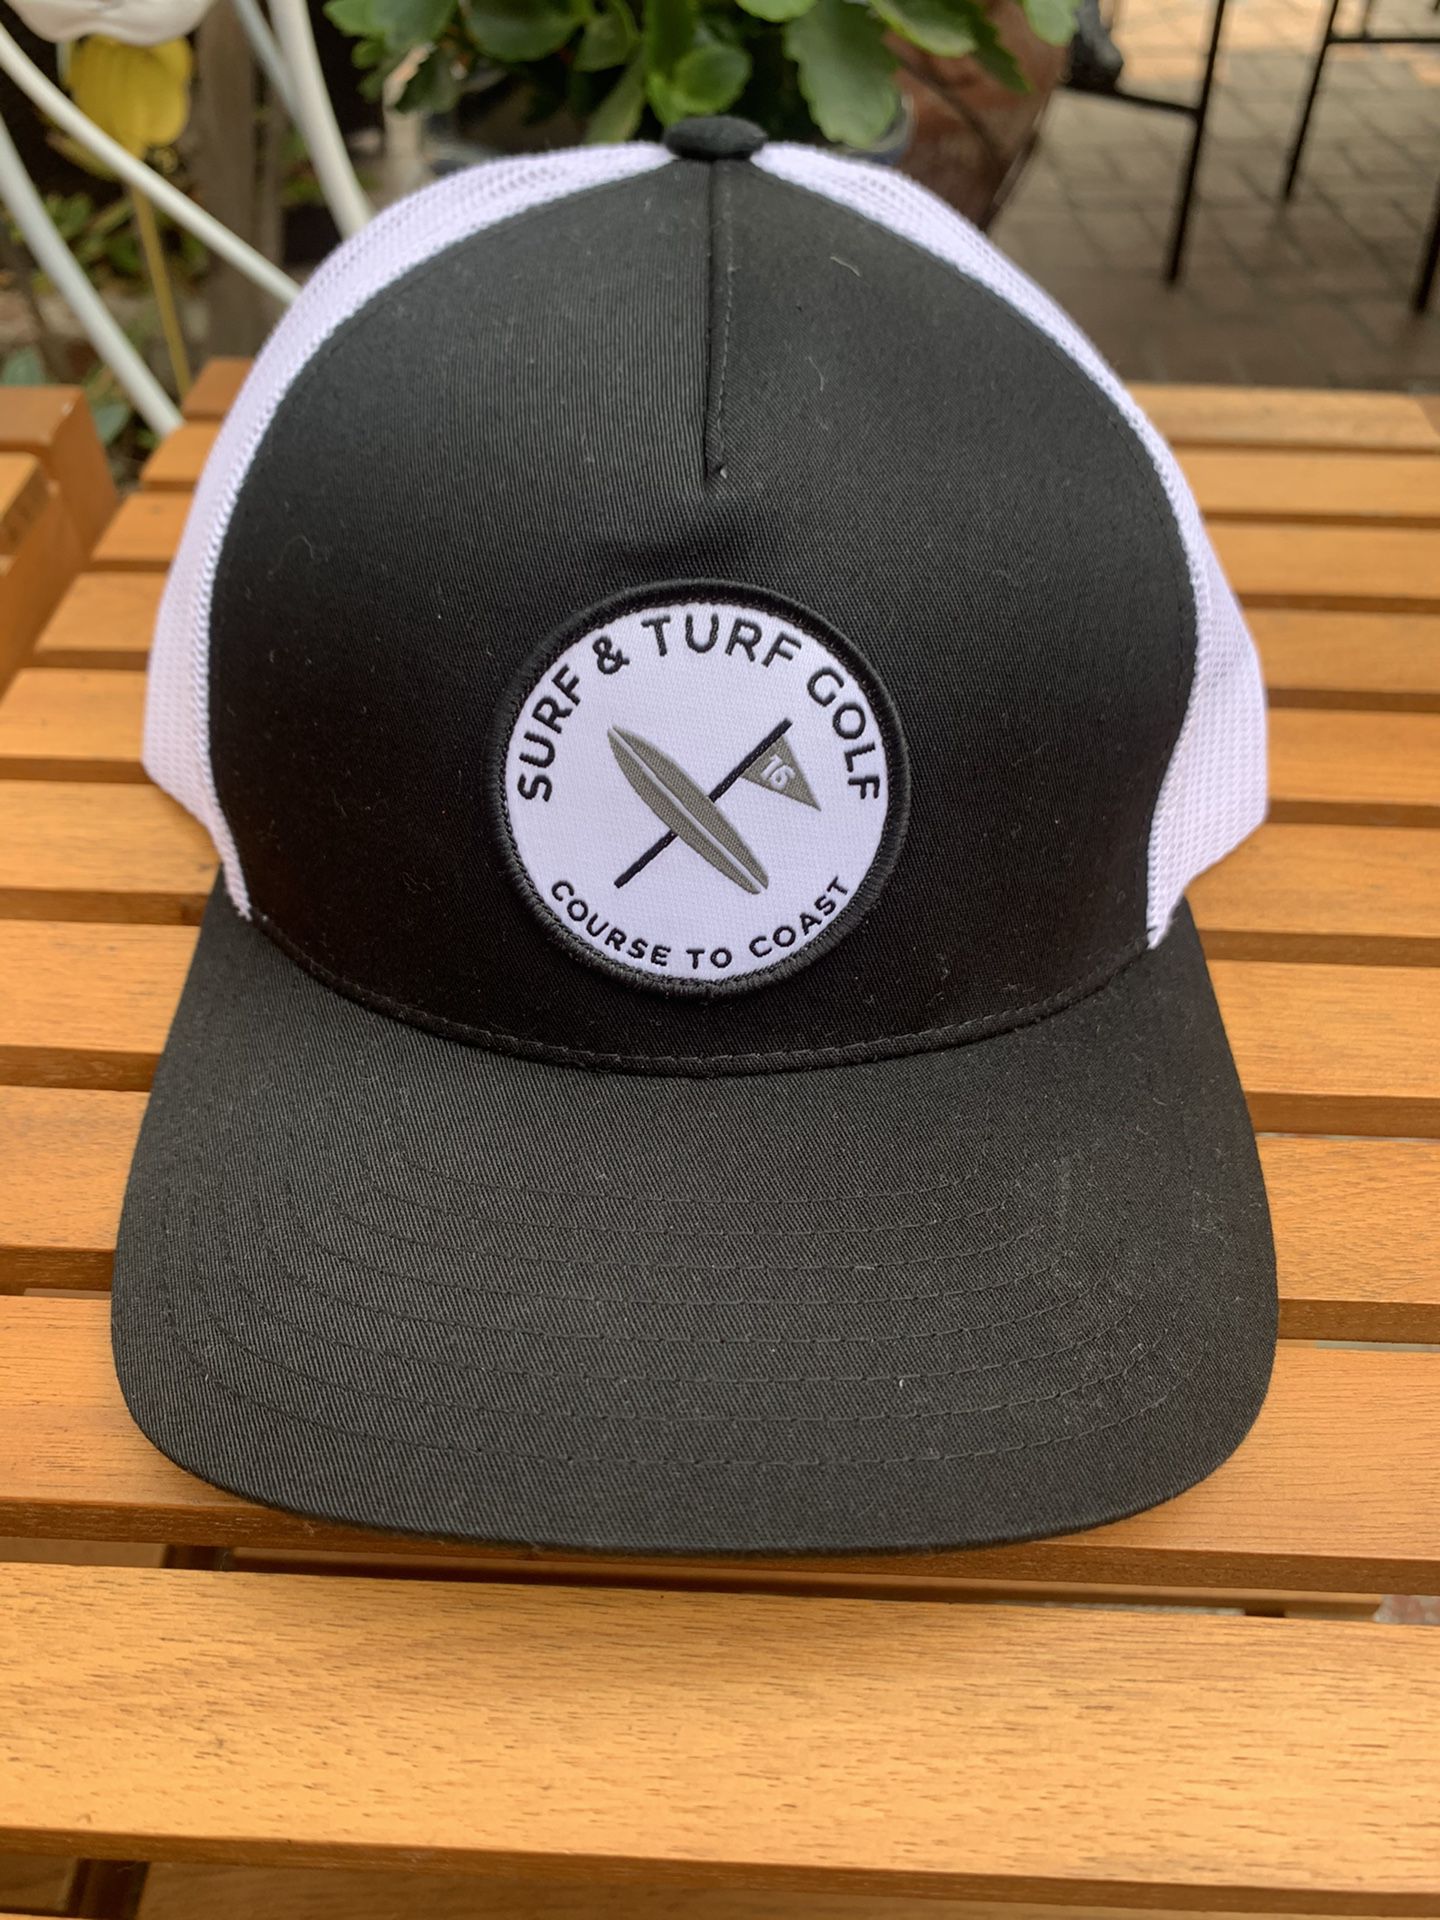 SURF & TURF | GOLF | COURSE TO COAST | HAT